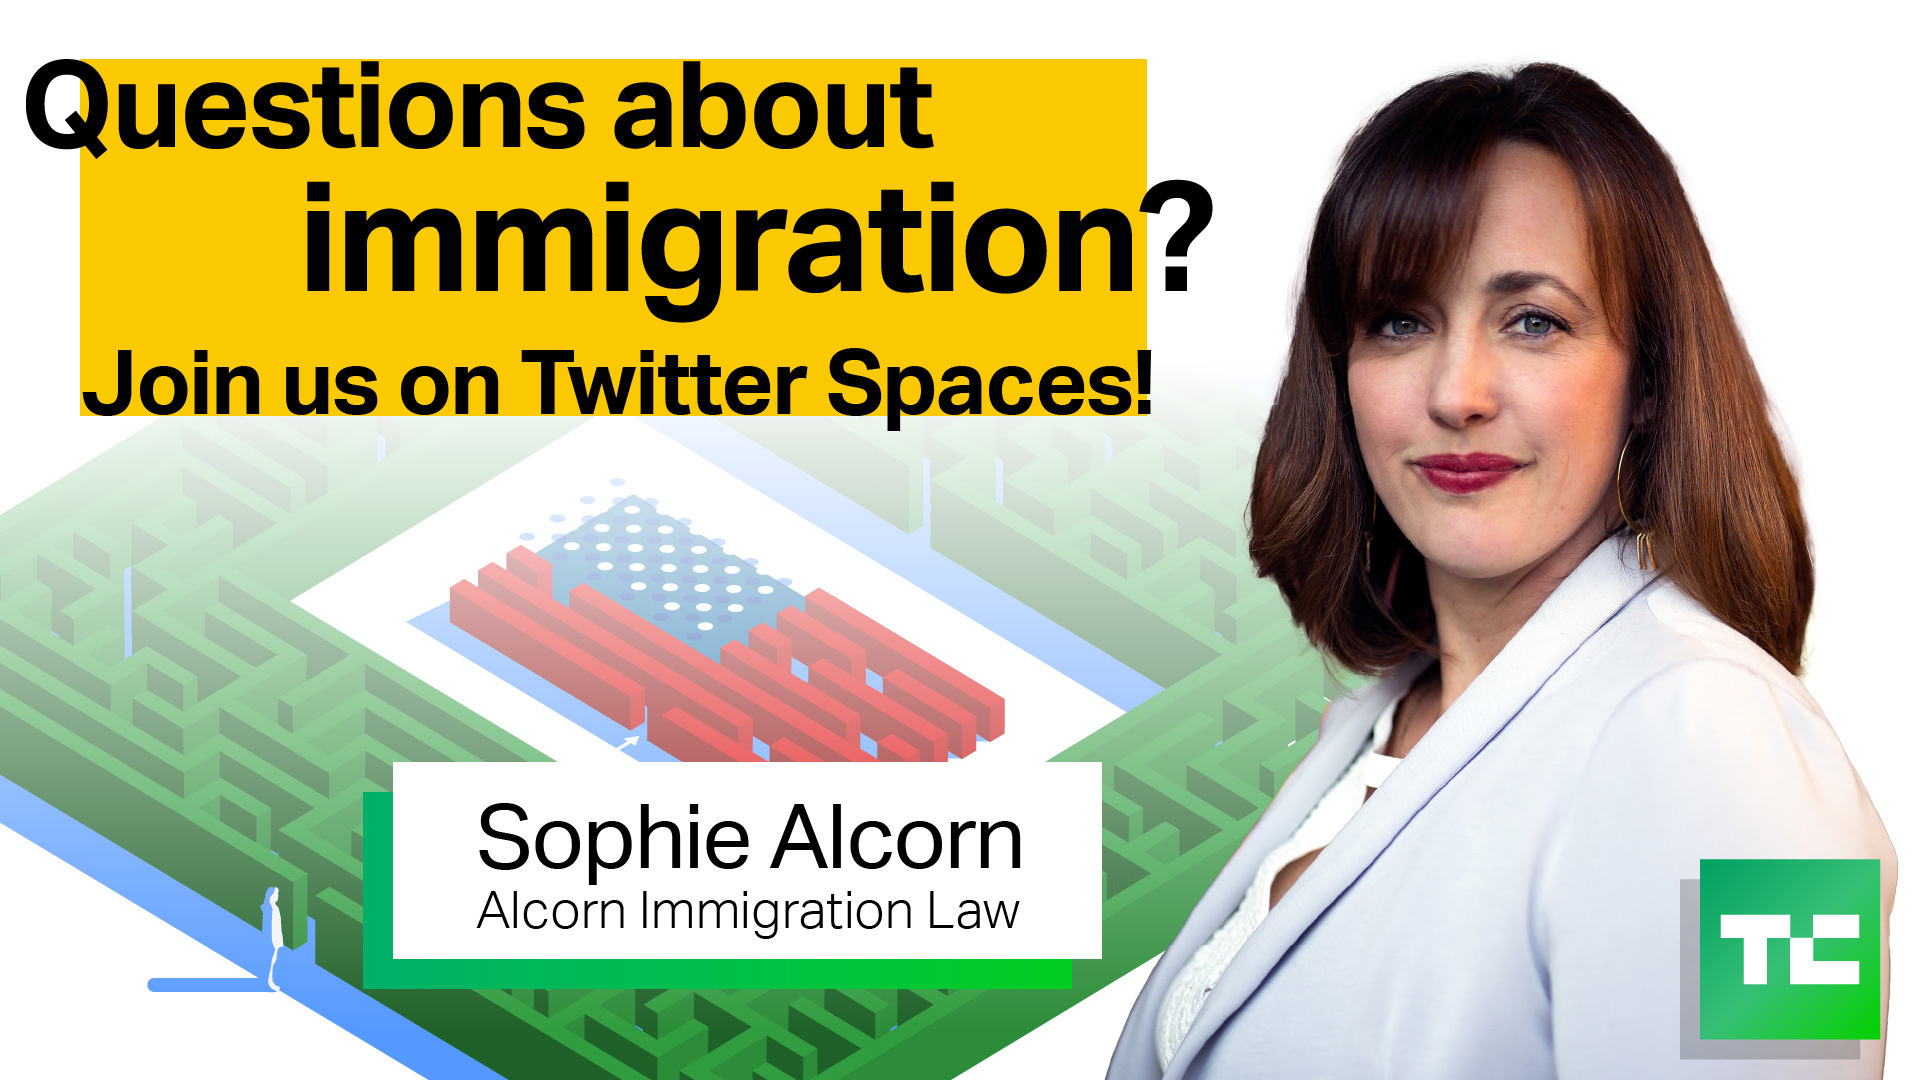 TechCrunch columnist Sophie Alcorn will join a TechCrunch + Twitter Space on Tuesday, May 24th.